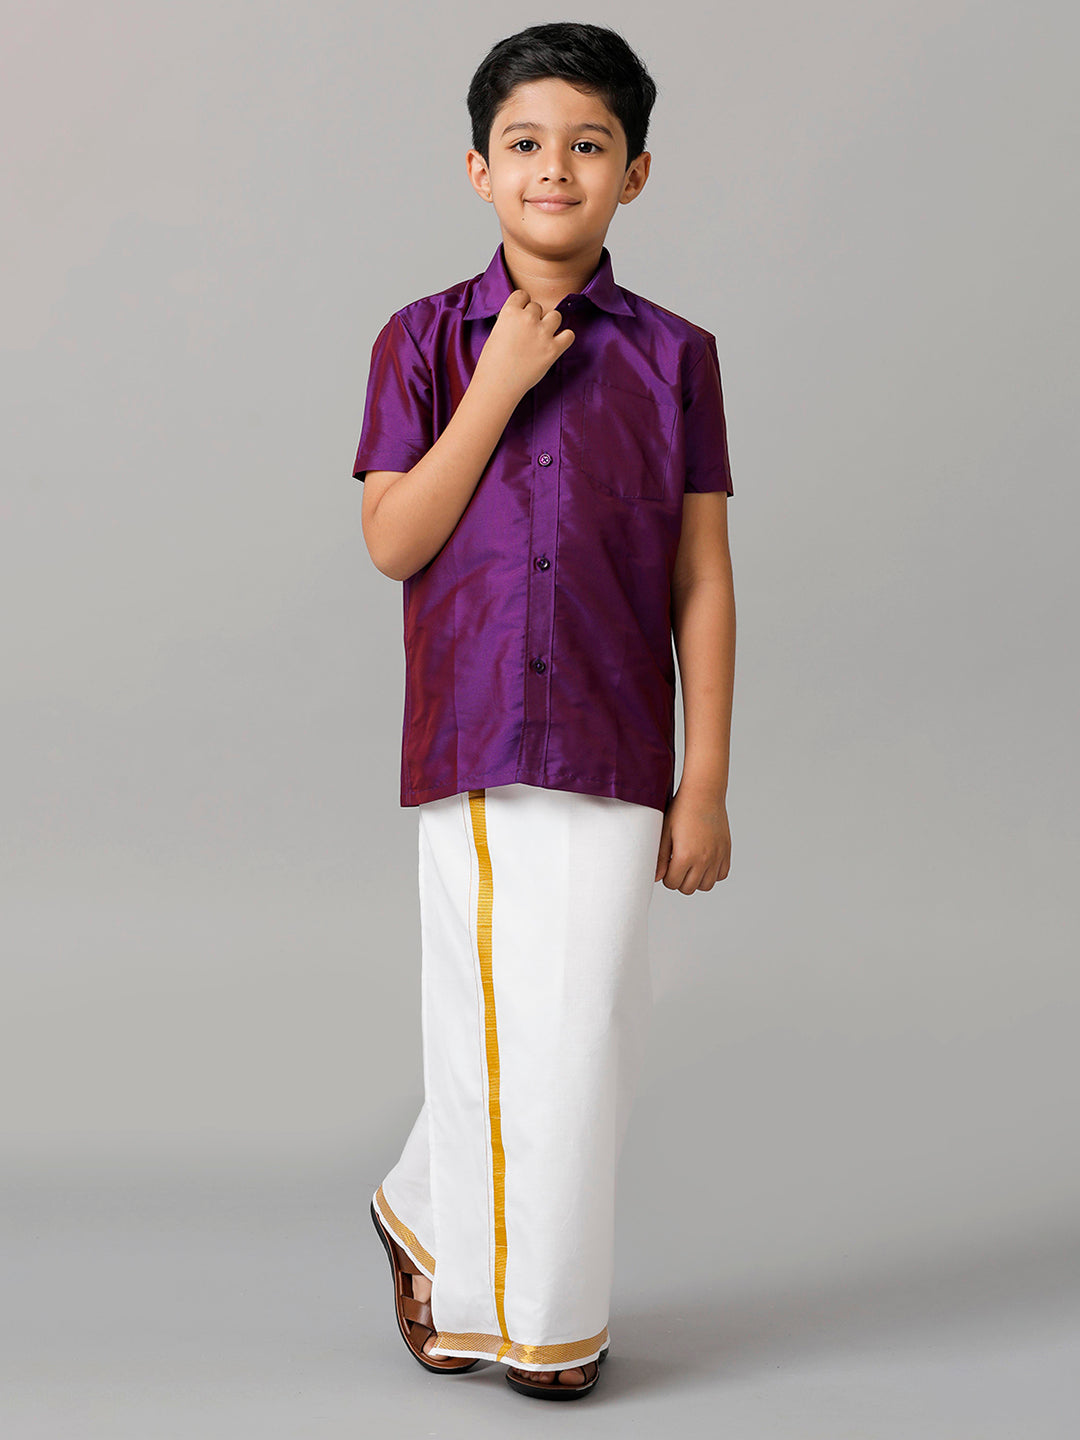 Boys Silk Cotton Violet Half Sleeves Shirt with Adjustable White Dhoti Combo K21-Front view